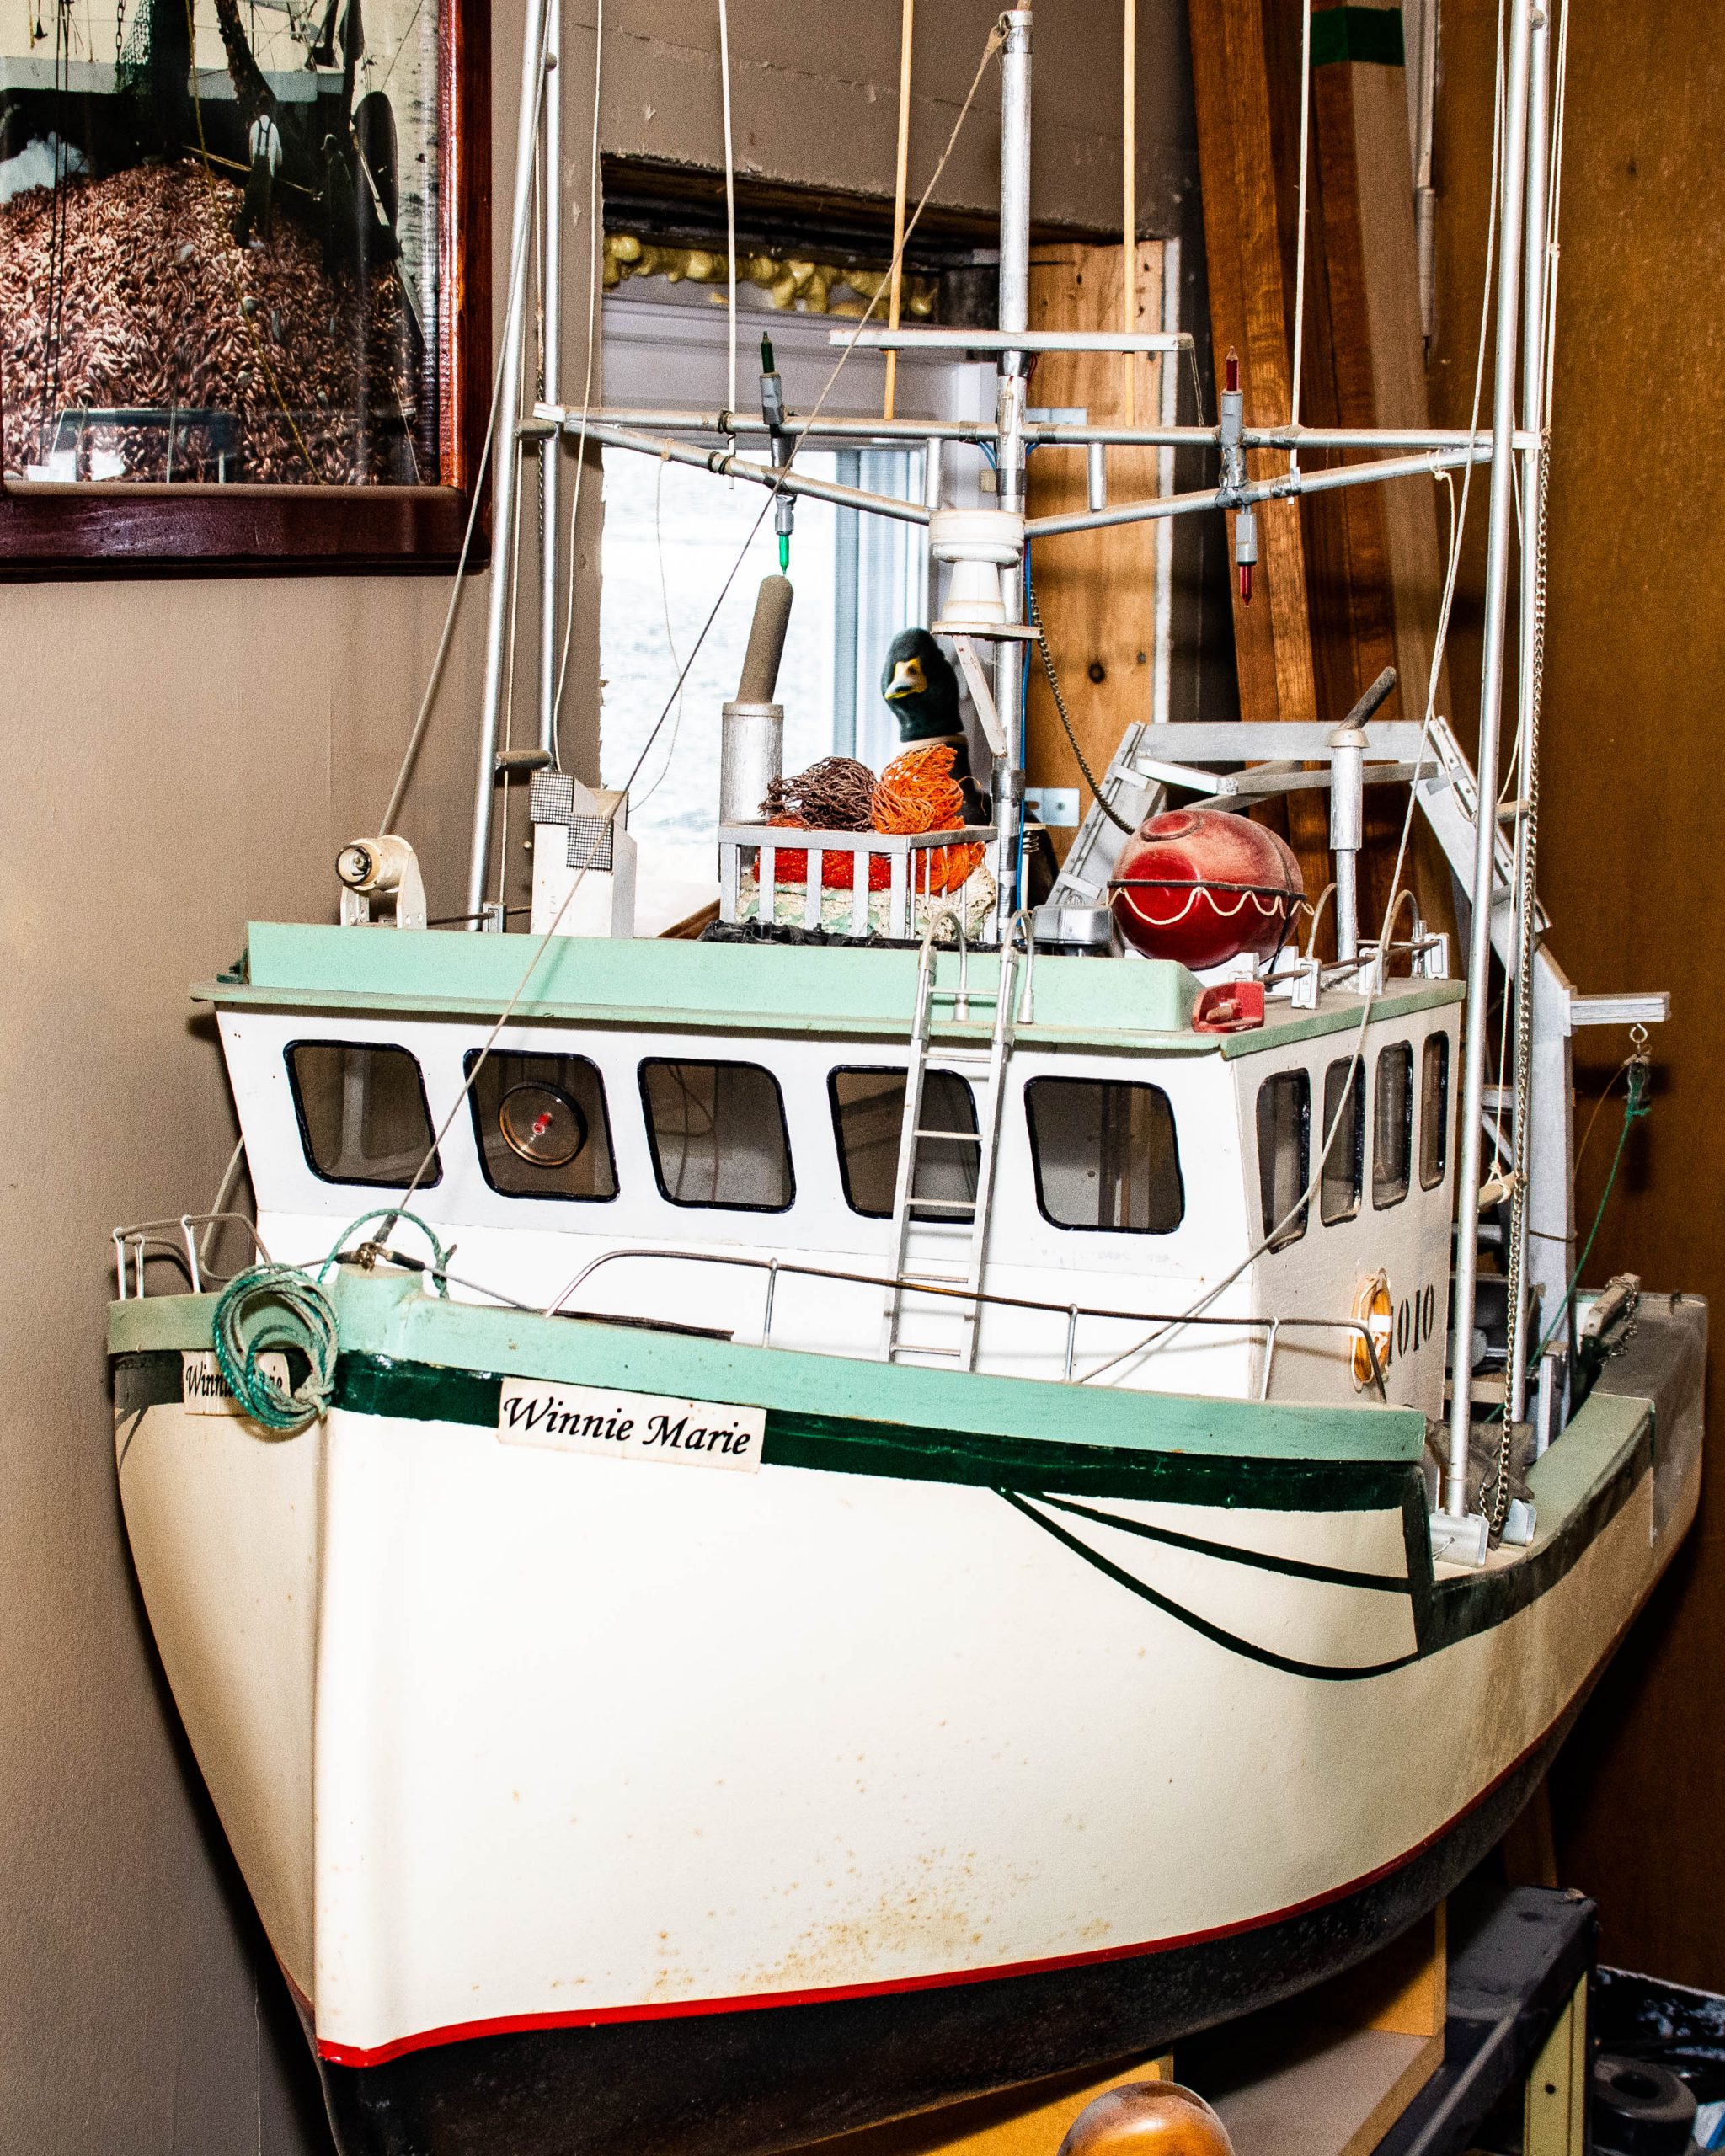 The Winnie Marie was the first model boat Kevin Made around 15 years ago. It is named for his wife.